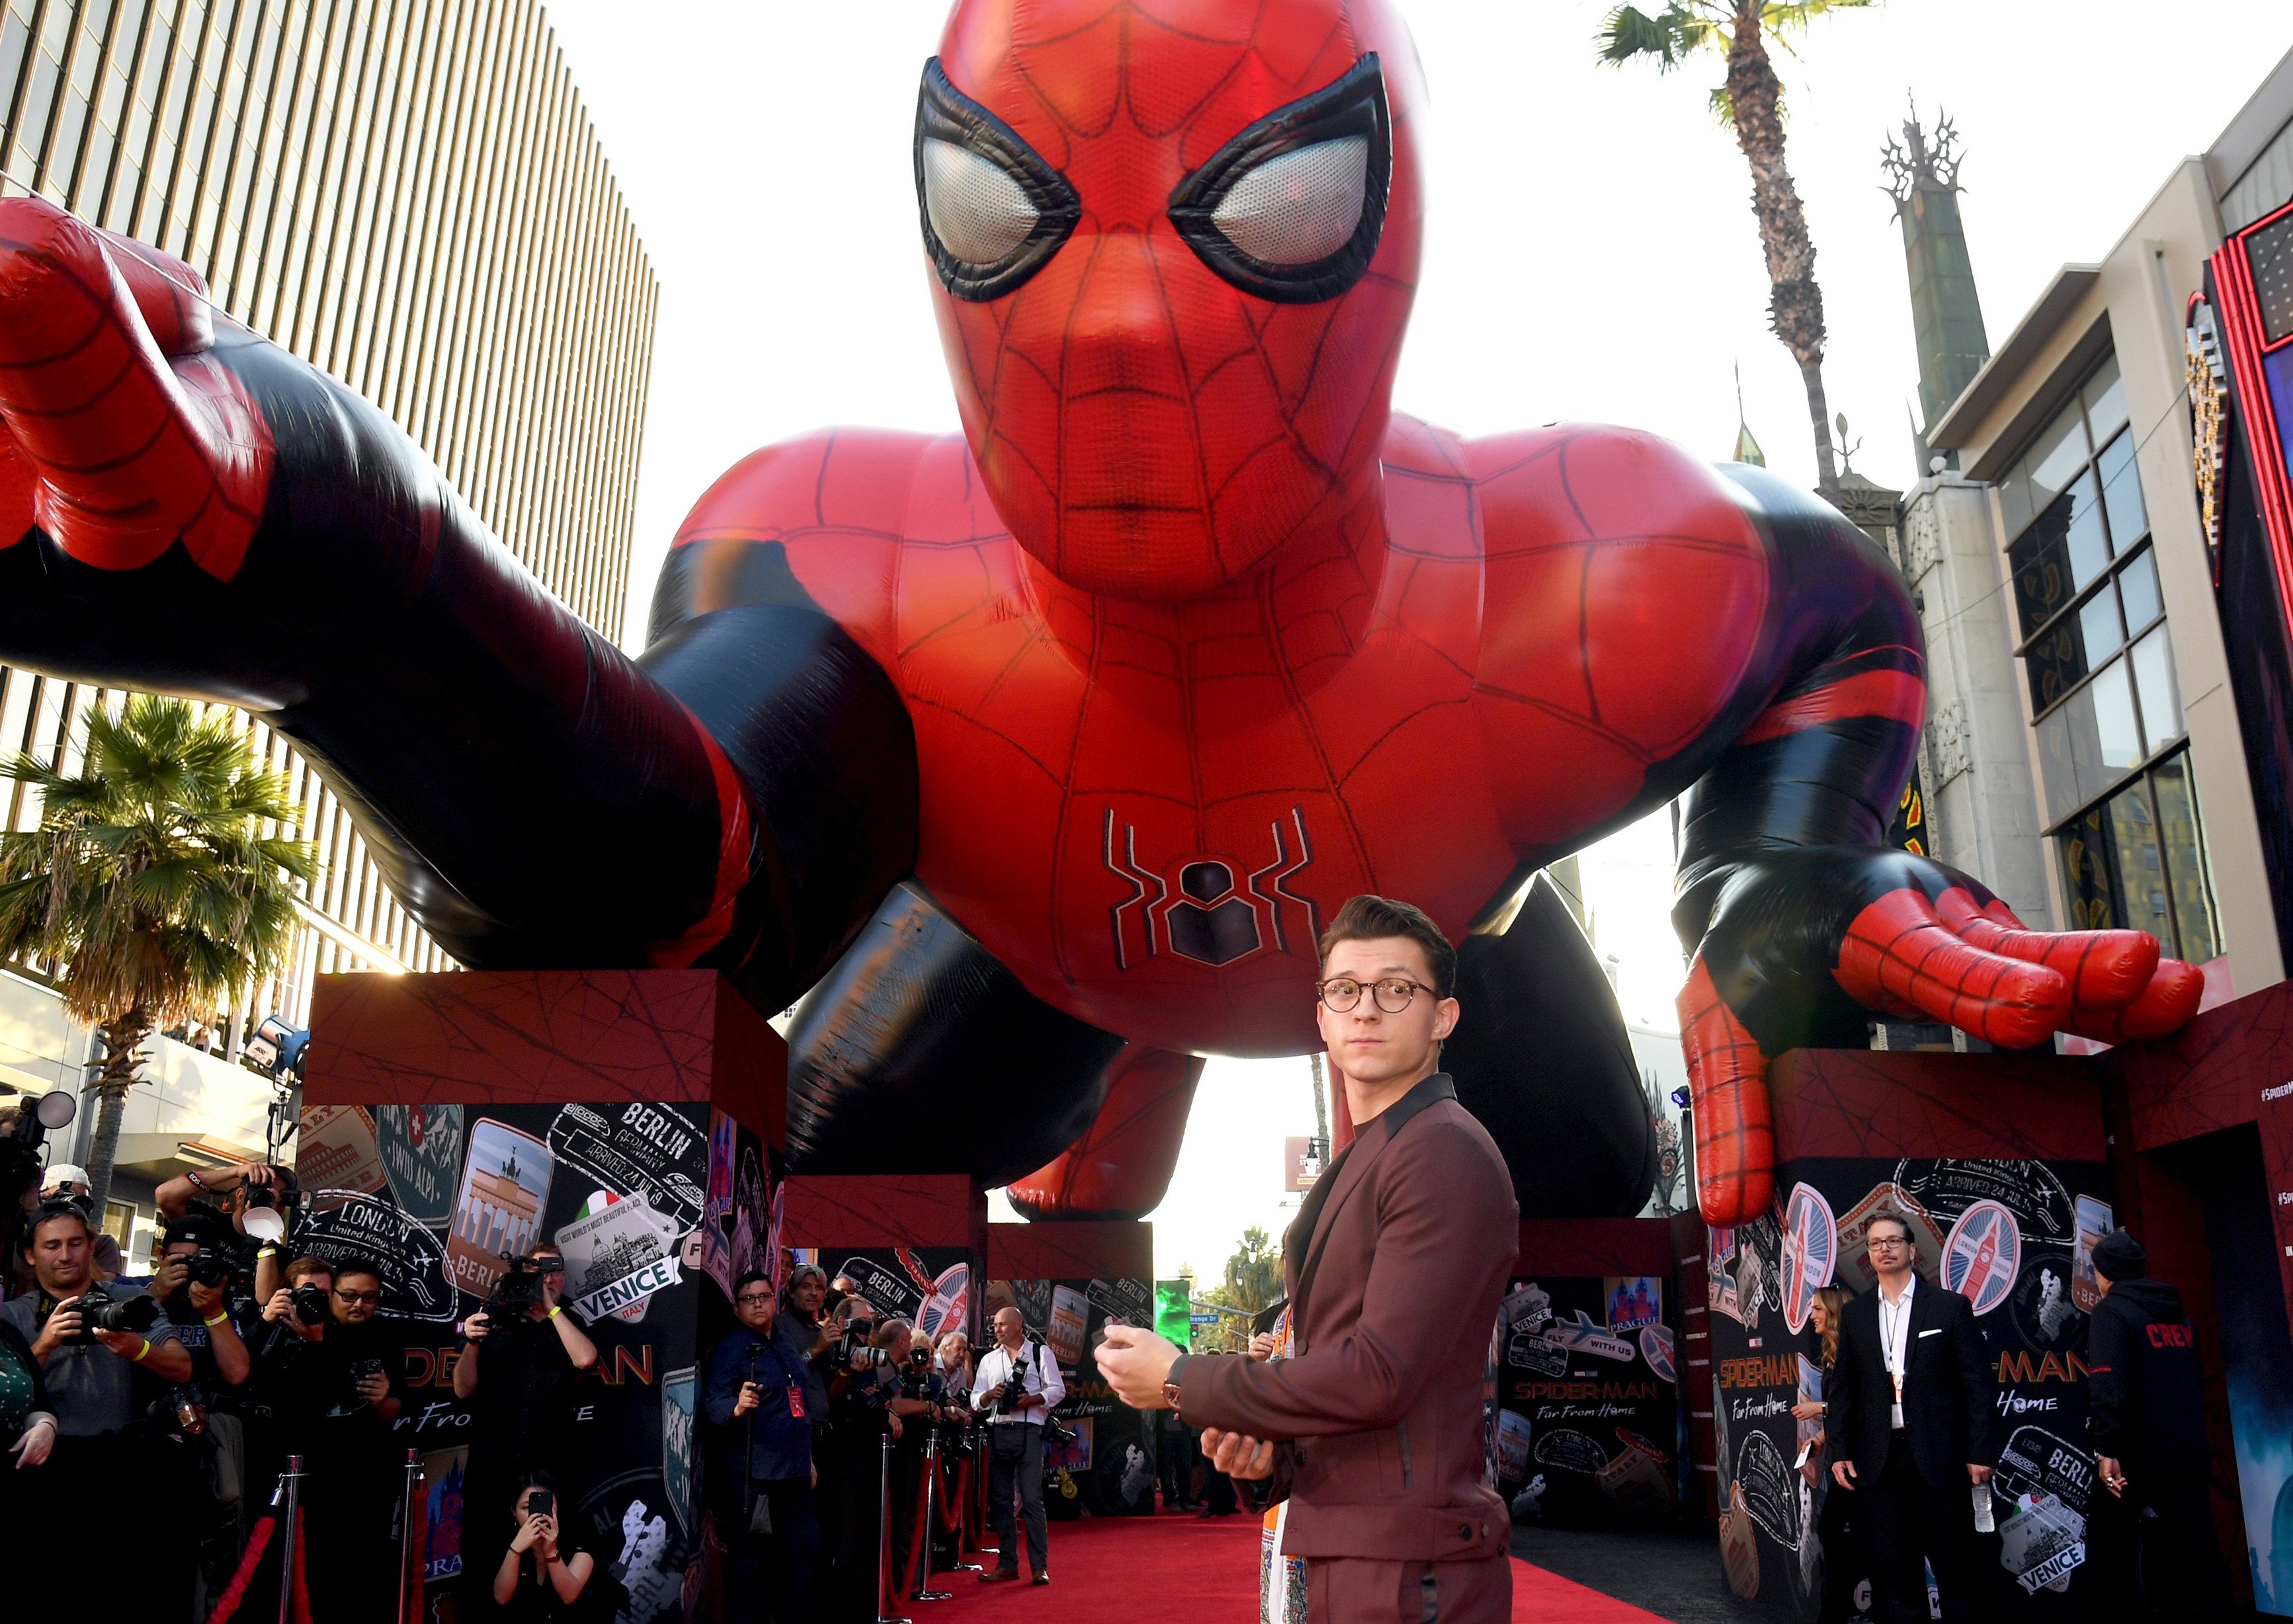 'Spider-Man: No Way Home' star Tom Holland walks the red carpet for a film premiere. He wears a maroon suit and glasses, and he stand in front of a huge blow-up Spider-Man balloon.